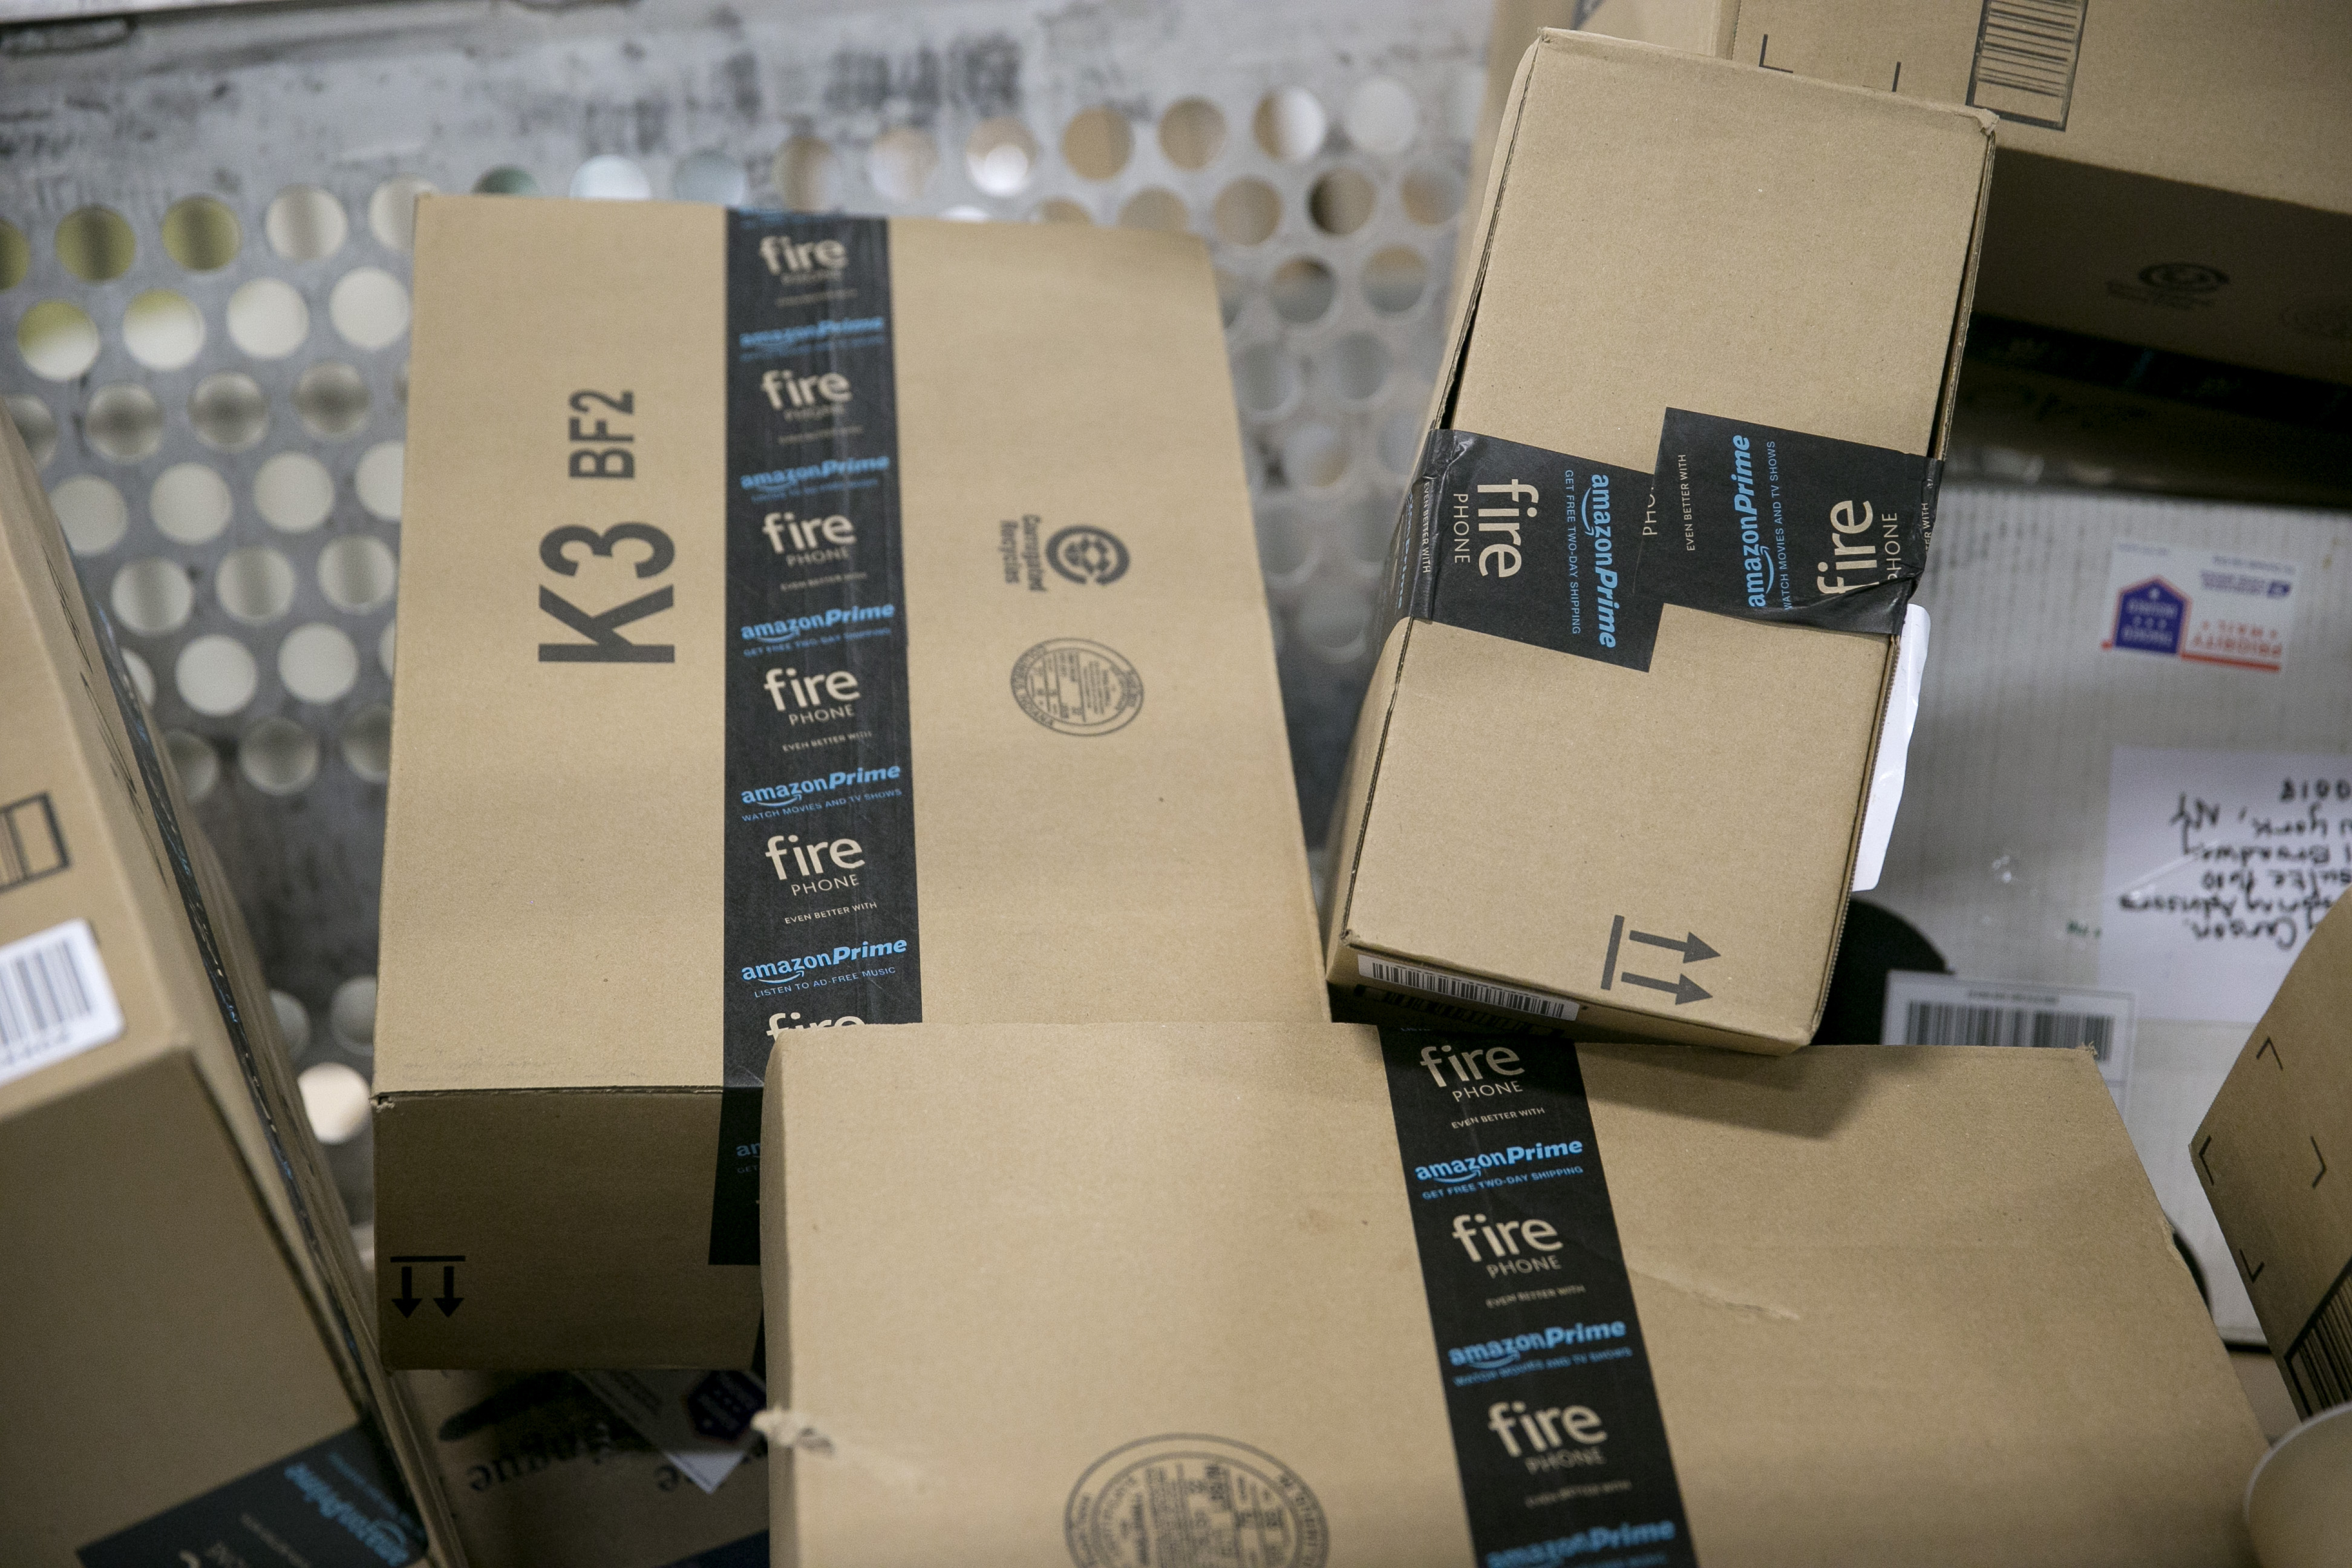 Amazon.com packages await shipment at the Indianapolis Mail Processing Annex Dec.15, 2014 in Indianapolis. (Aaron P. Bernstein—Getty Images)